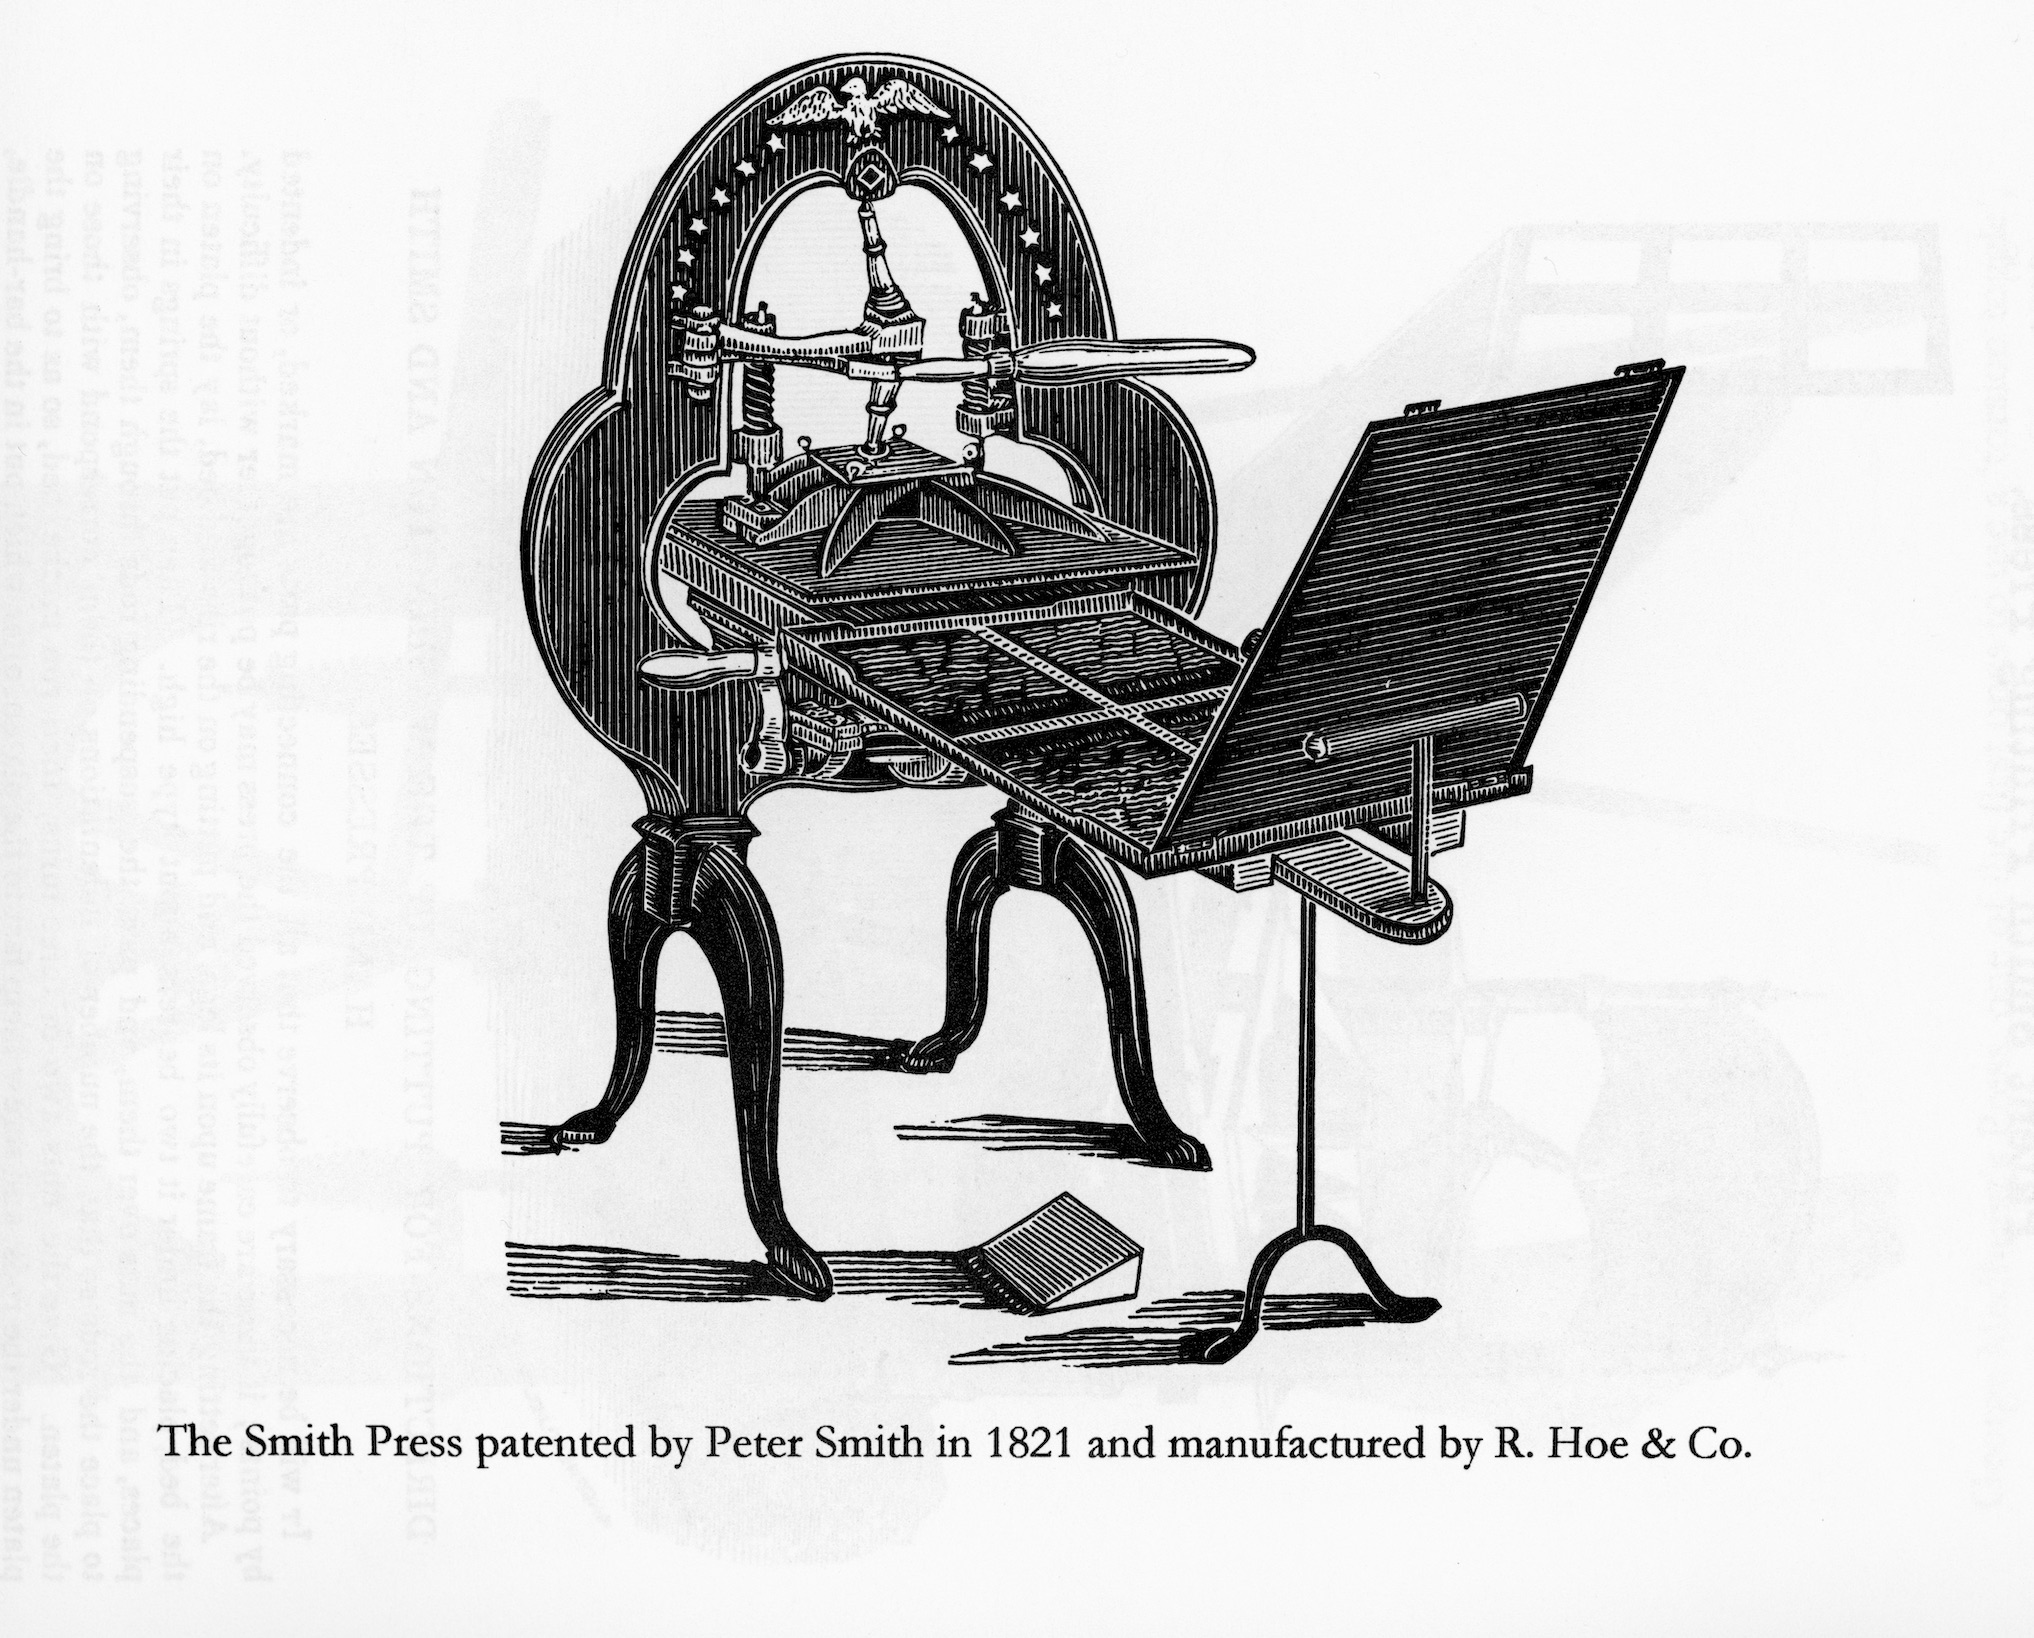 Smith Acorn Press, manufactured by R. Hoe & Co.